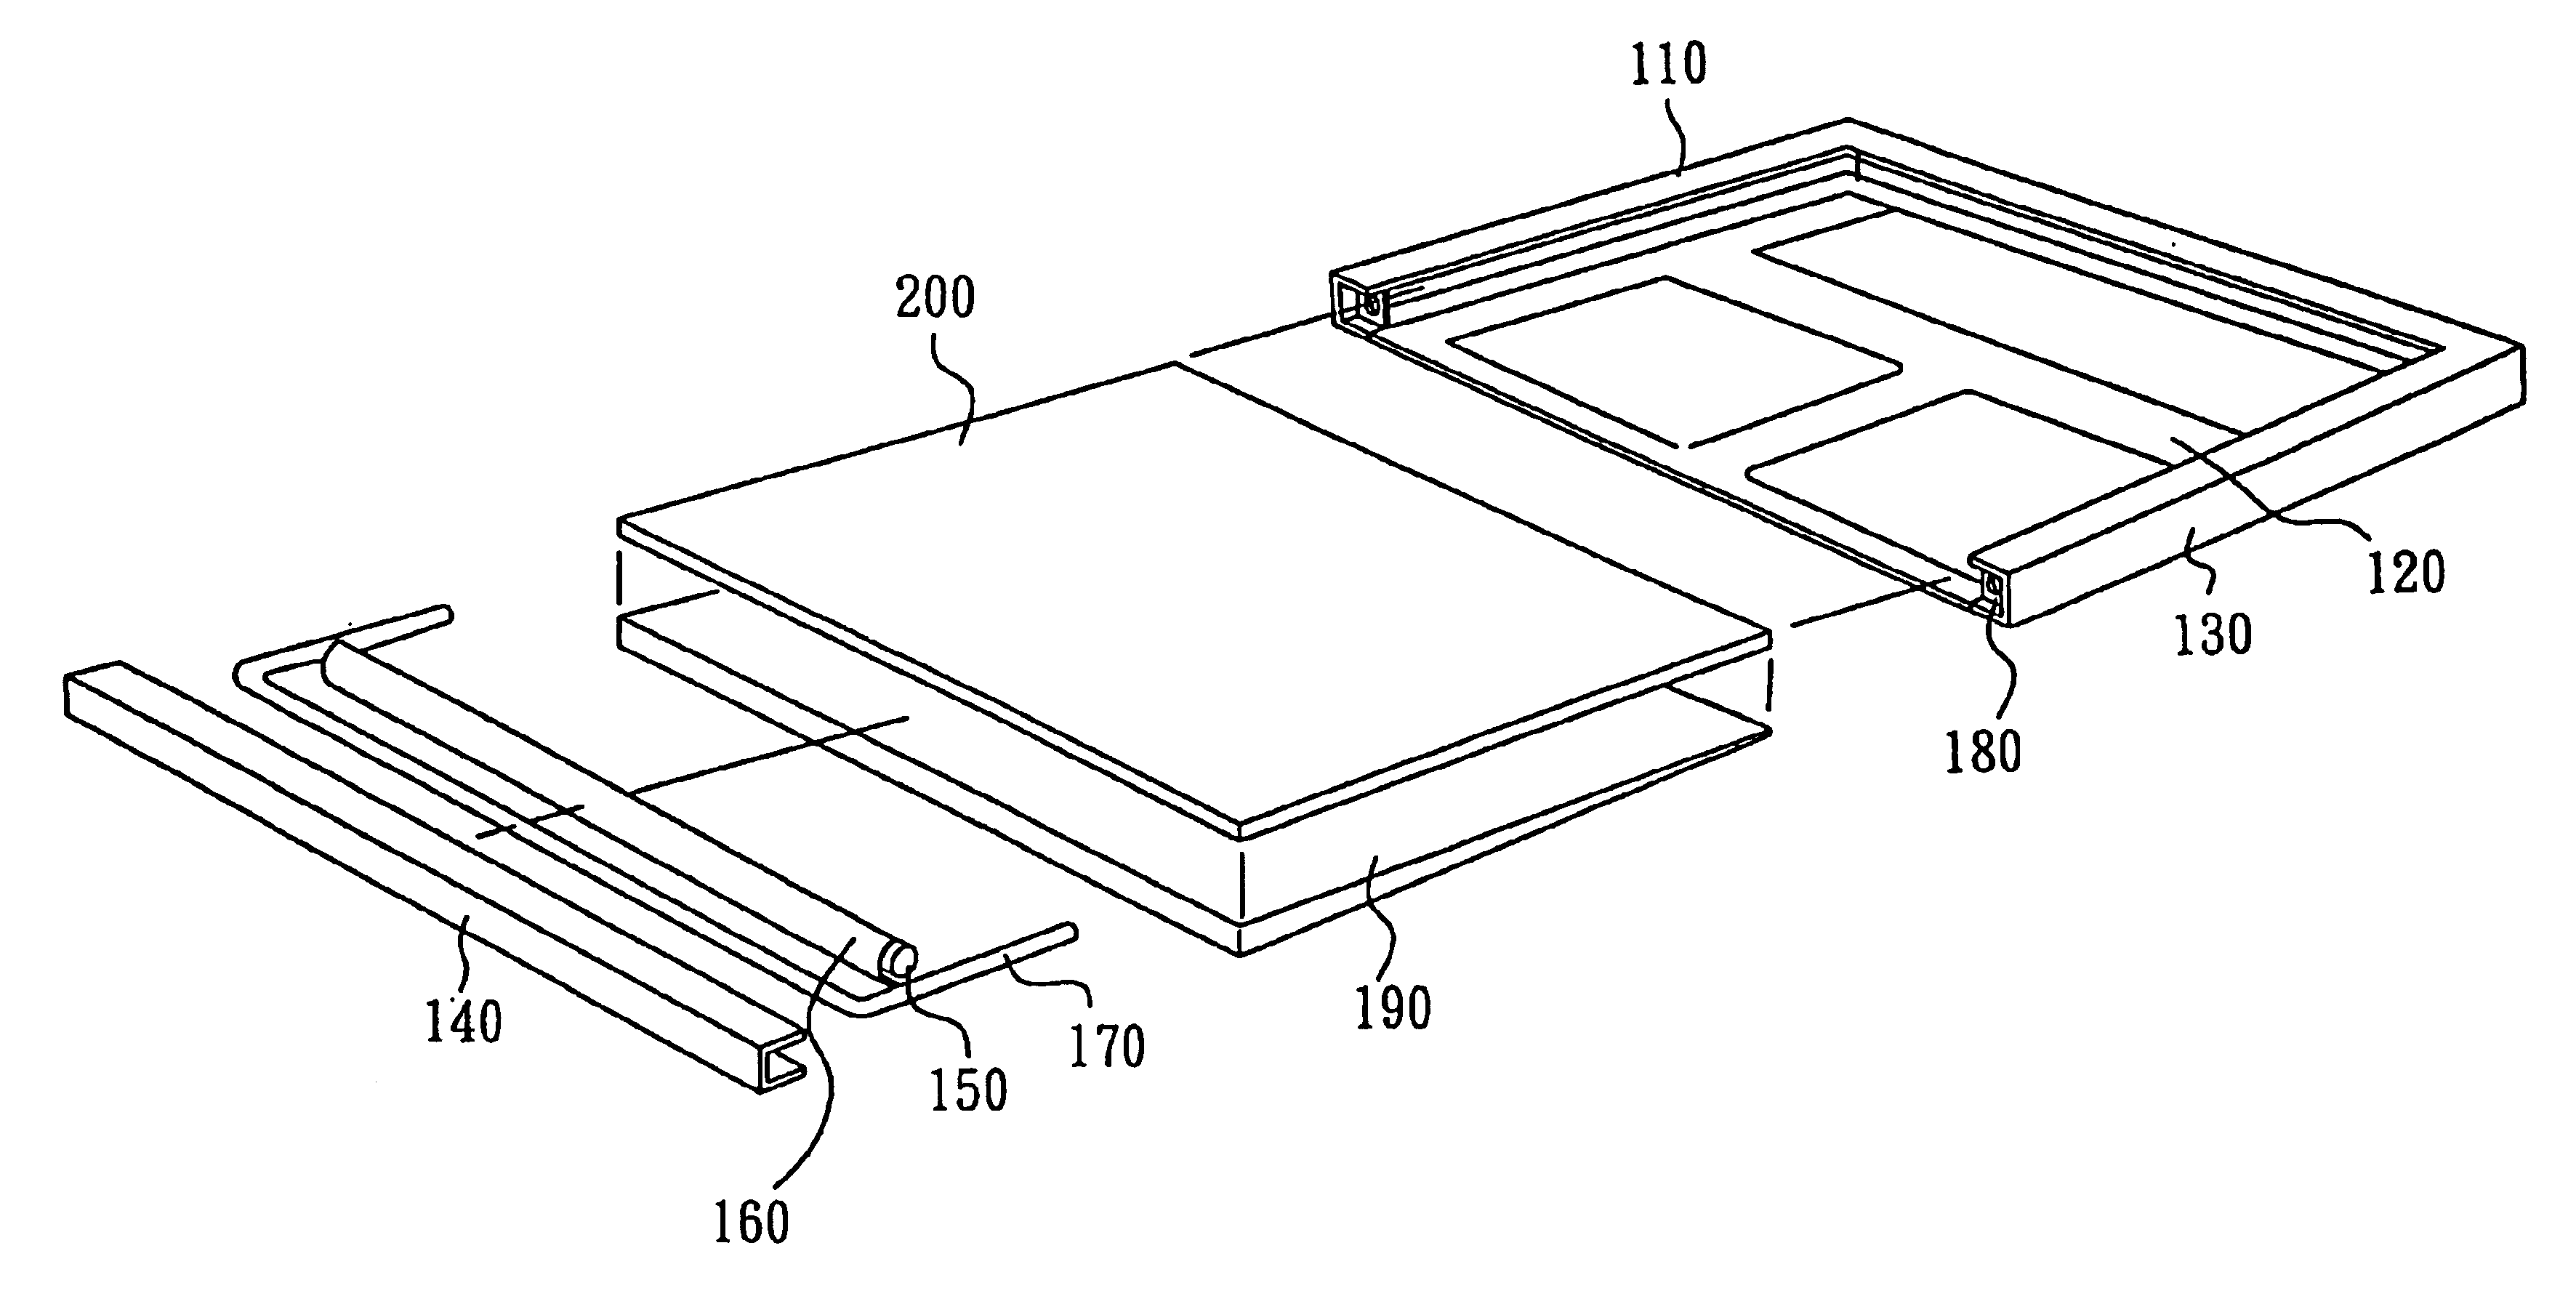 Backlight module for homogenizing the temperature of a flat panel display device